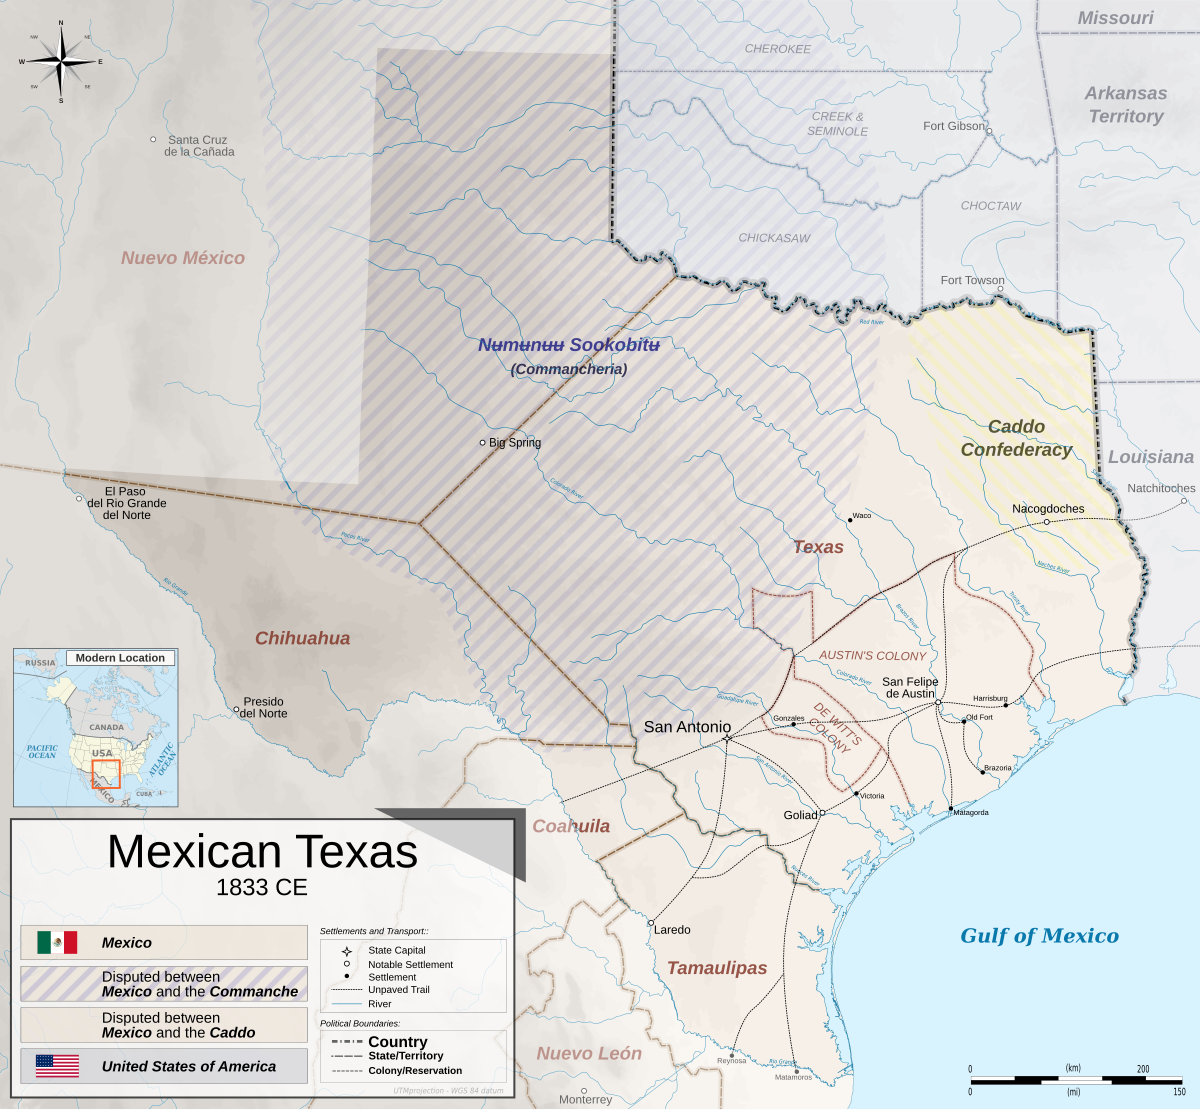 When and how did Texas gain independence from Mexico? by Annie